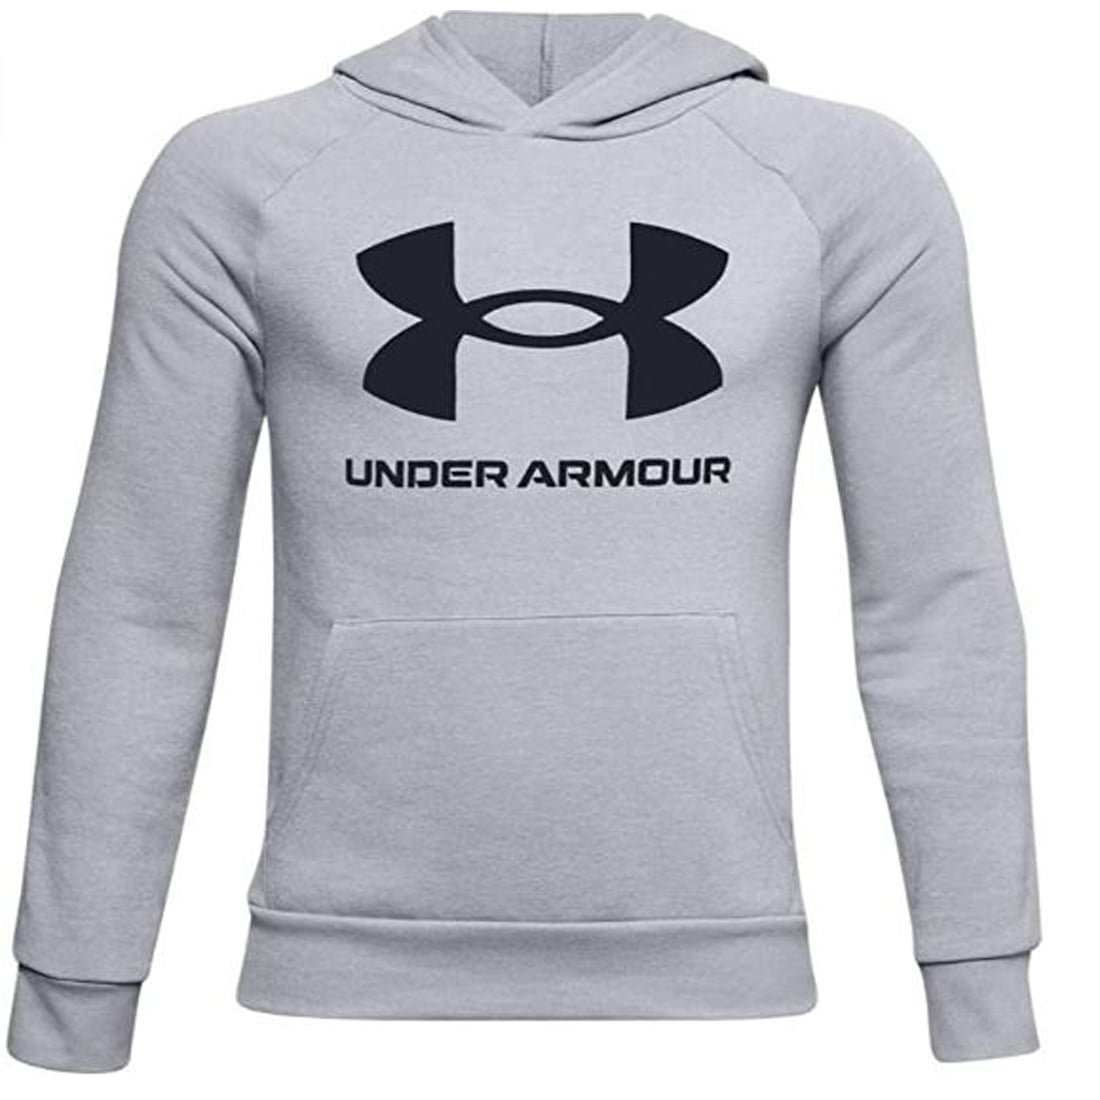 Under Armour Boys Pull Over Hoody with Pocket 